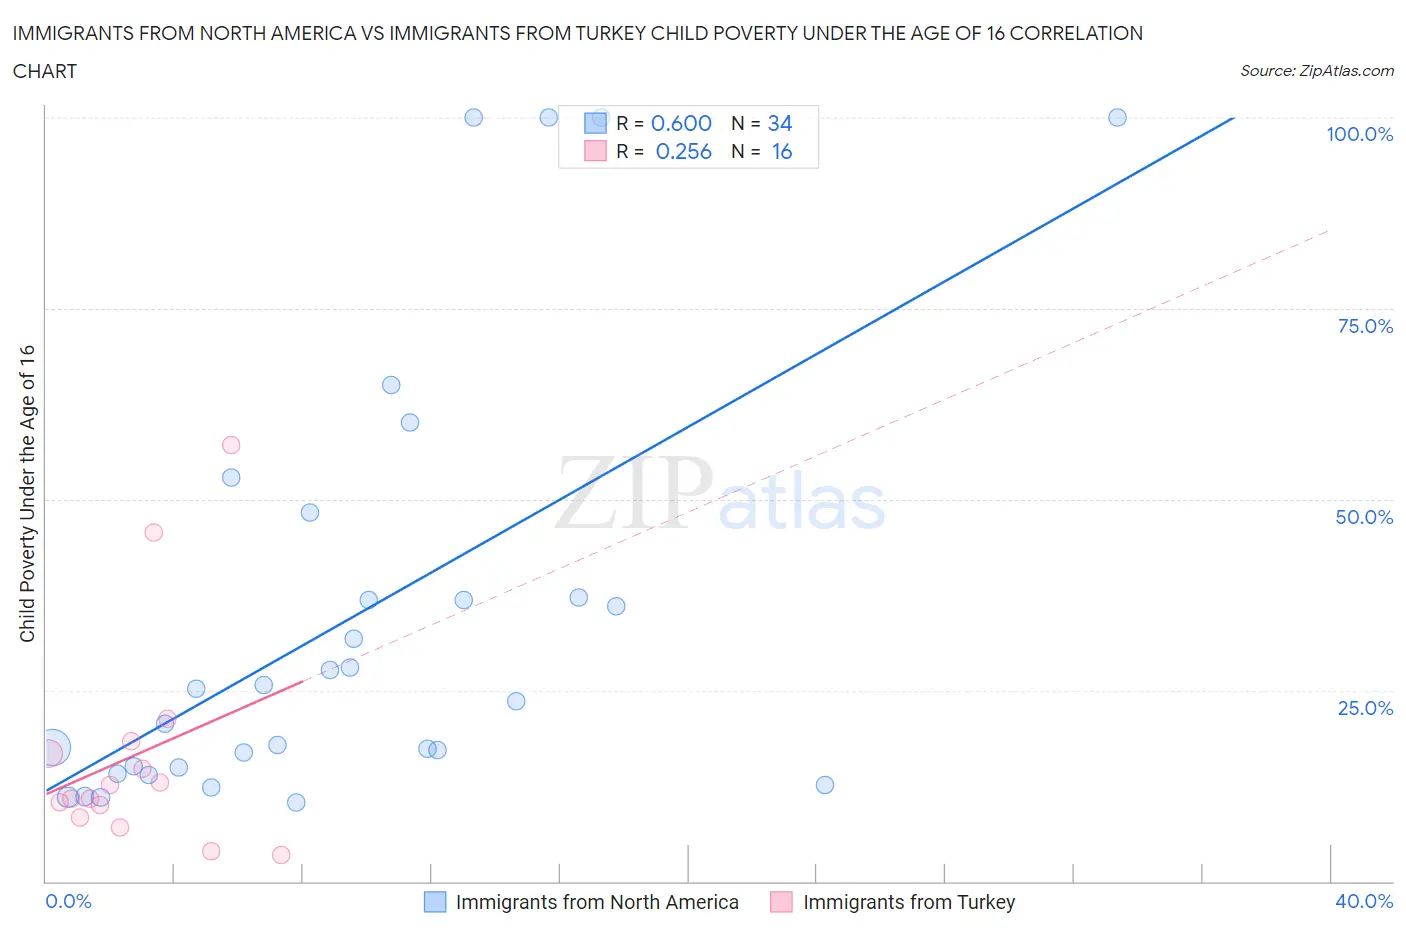 Immigrants from North America vs Immigrants from Turkey Child Poverty Under the Age of 16